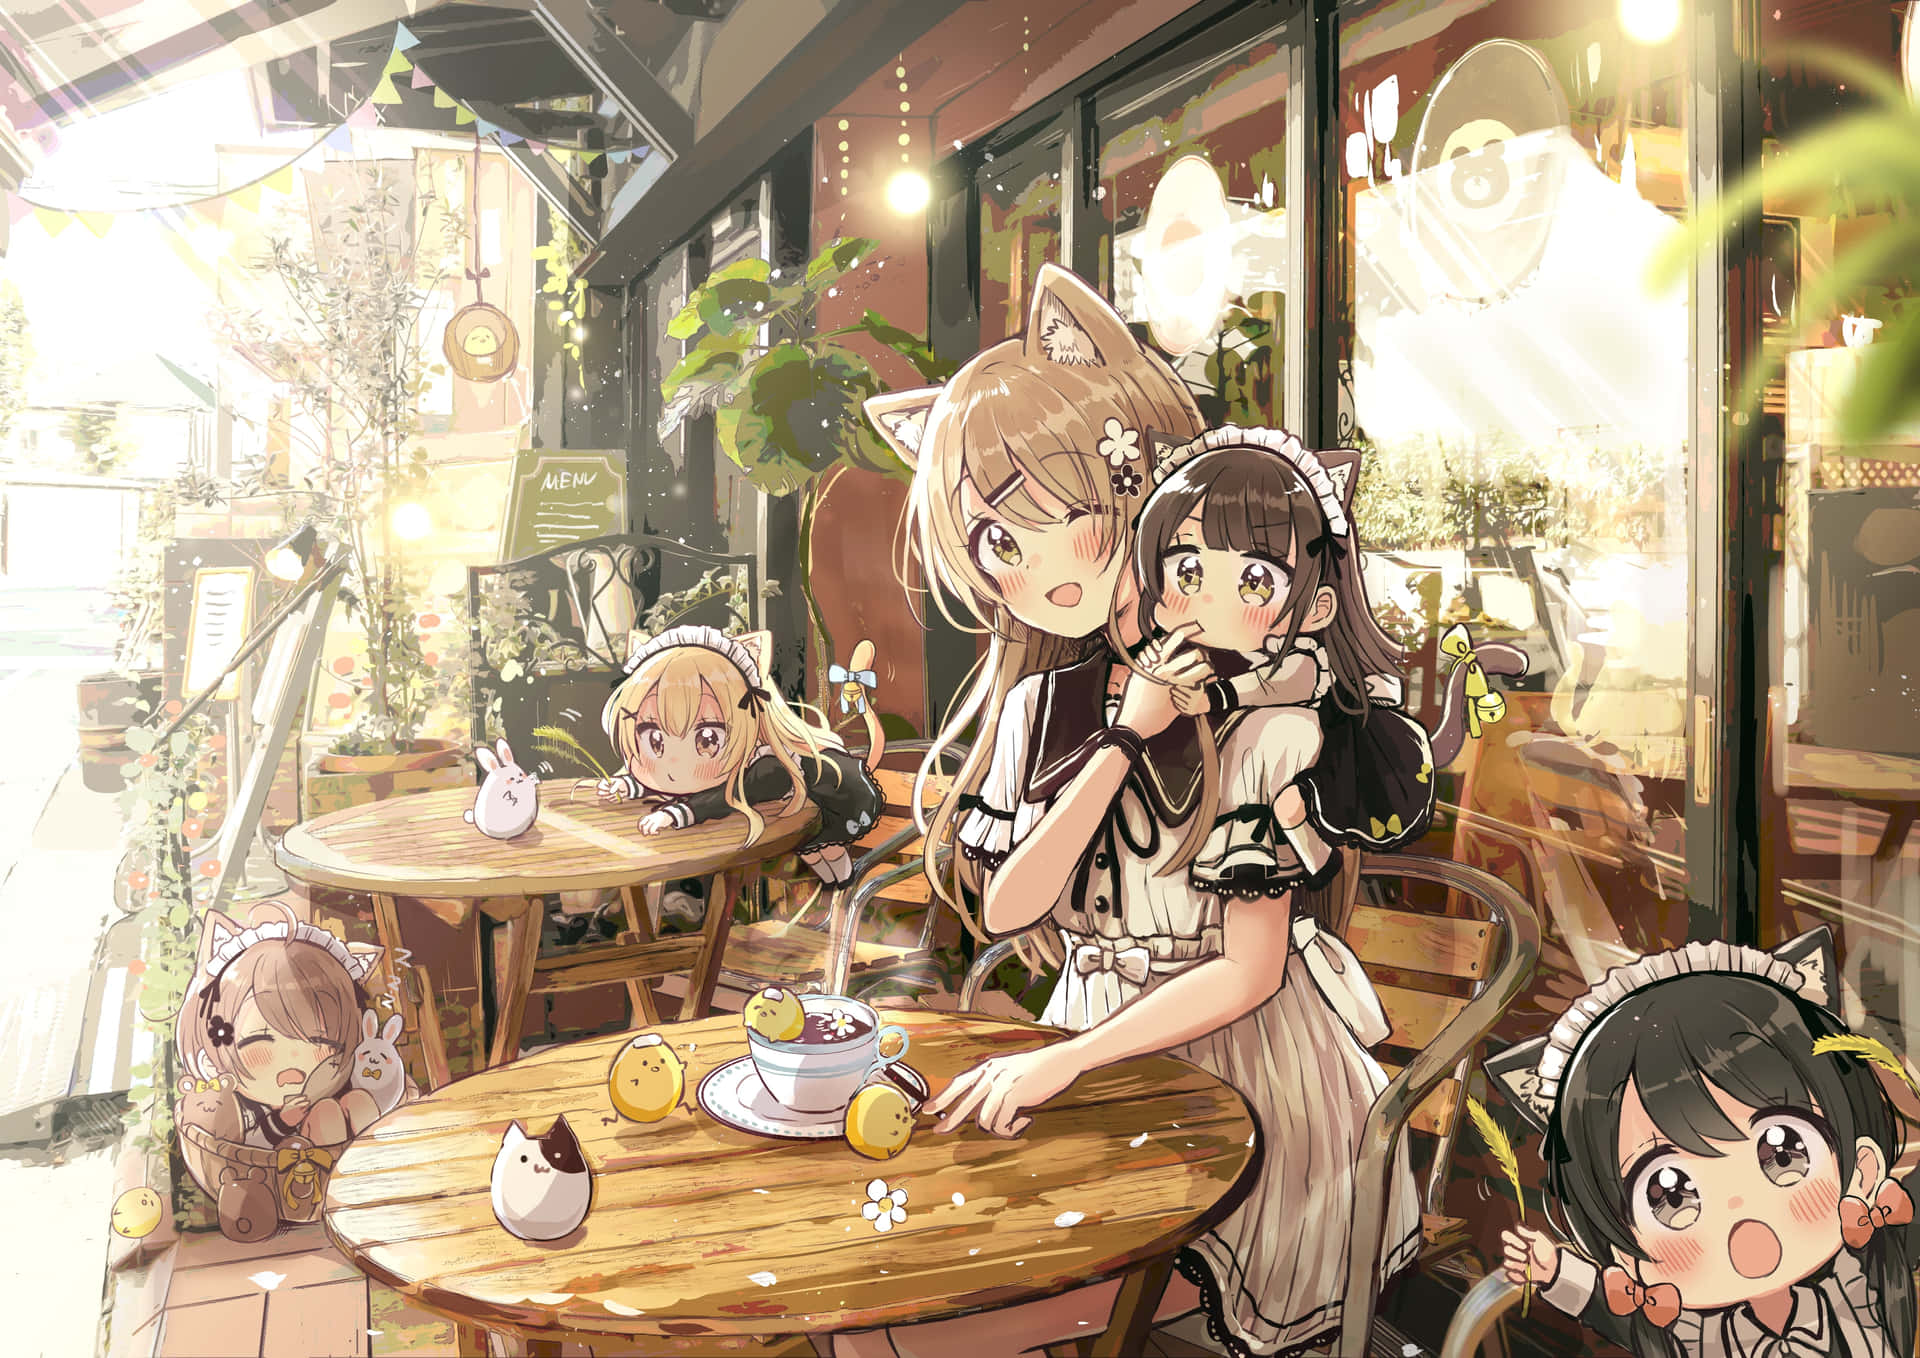 Sötcafe Anime (referring To A Wallpaper Featuring A Cute Anime Depiction Of A Cafe) Wallpaper